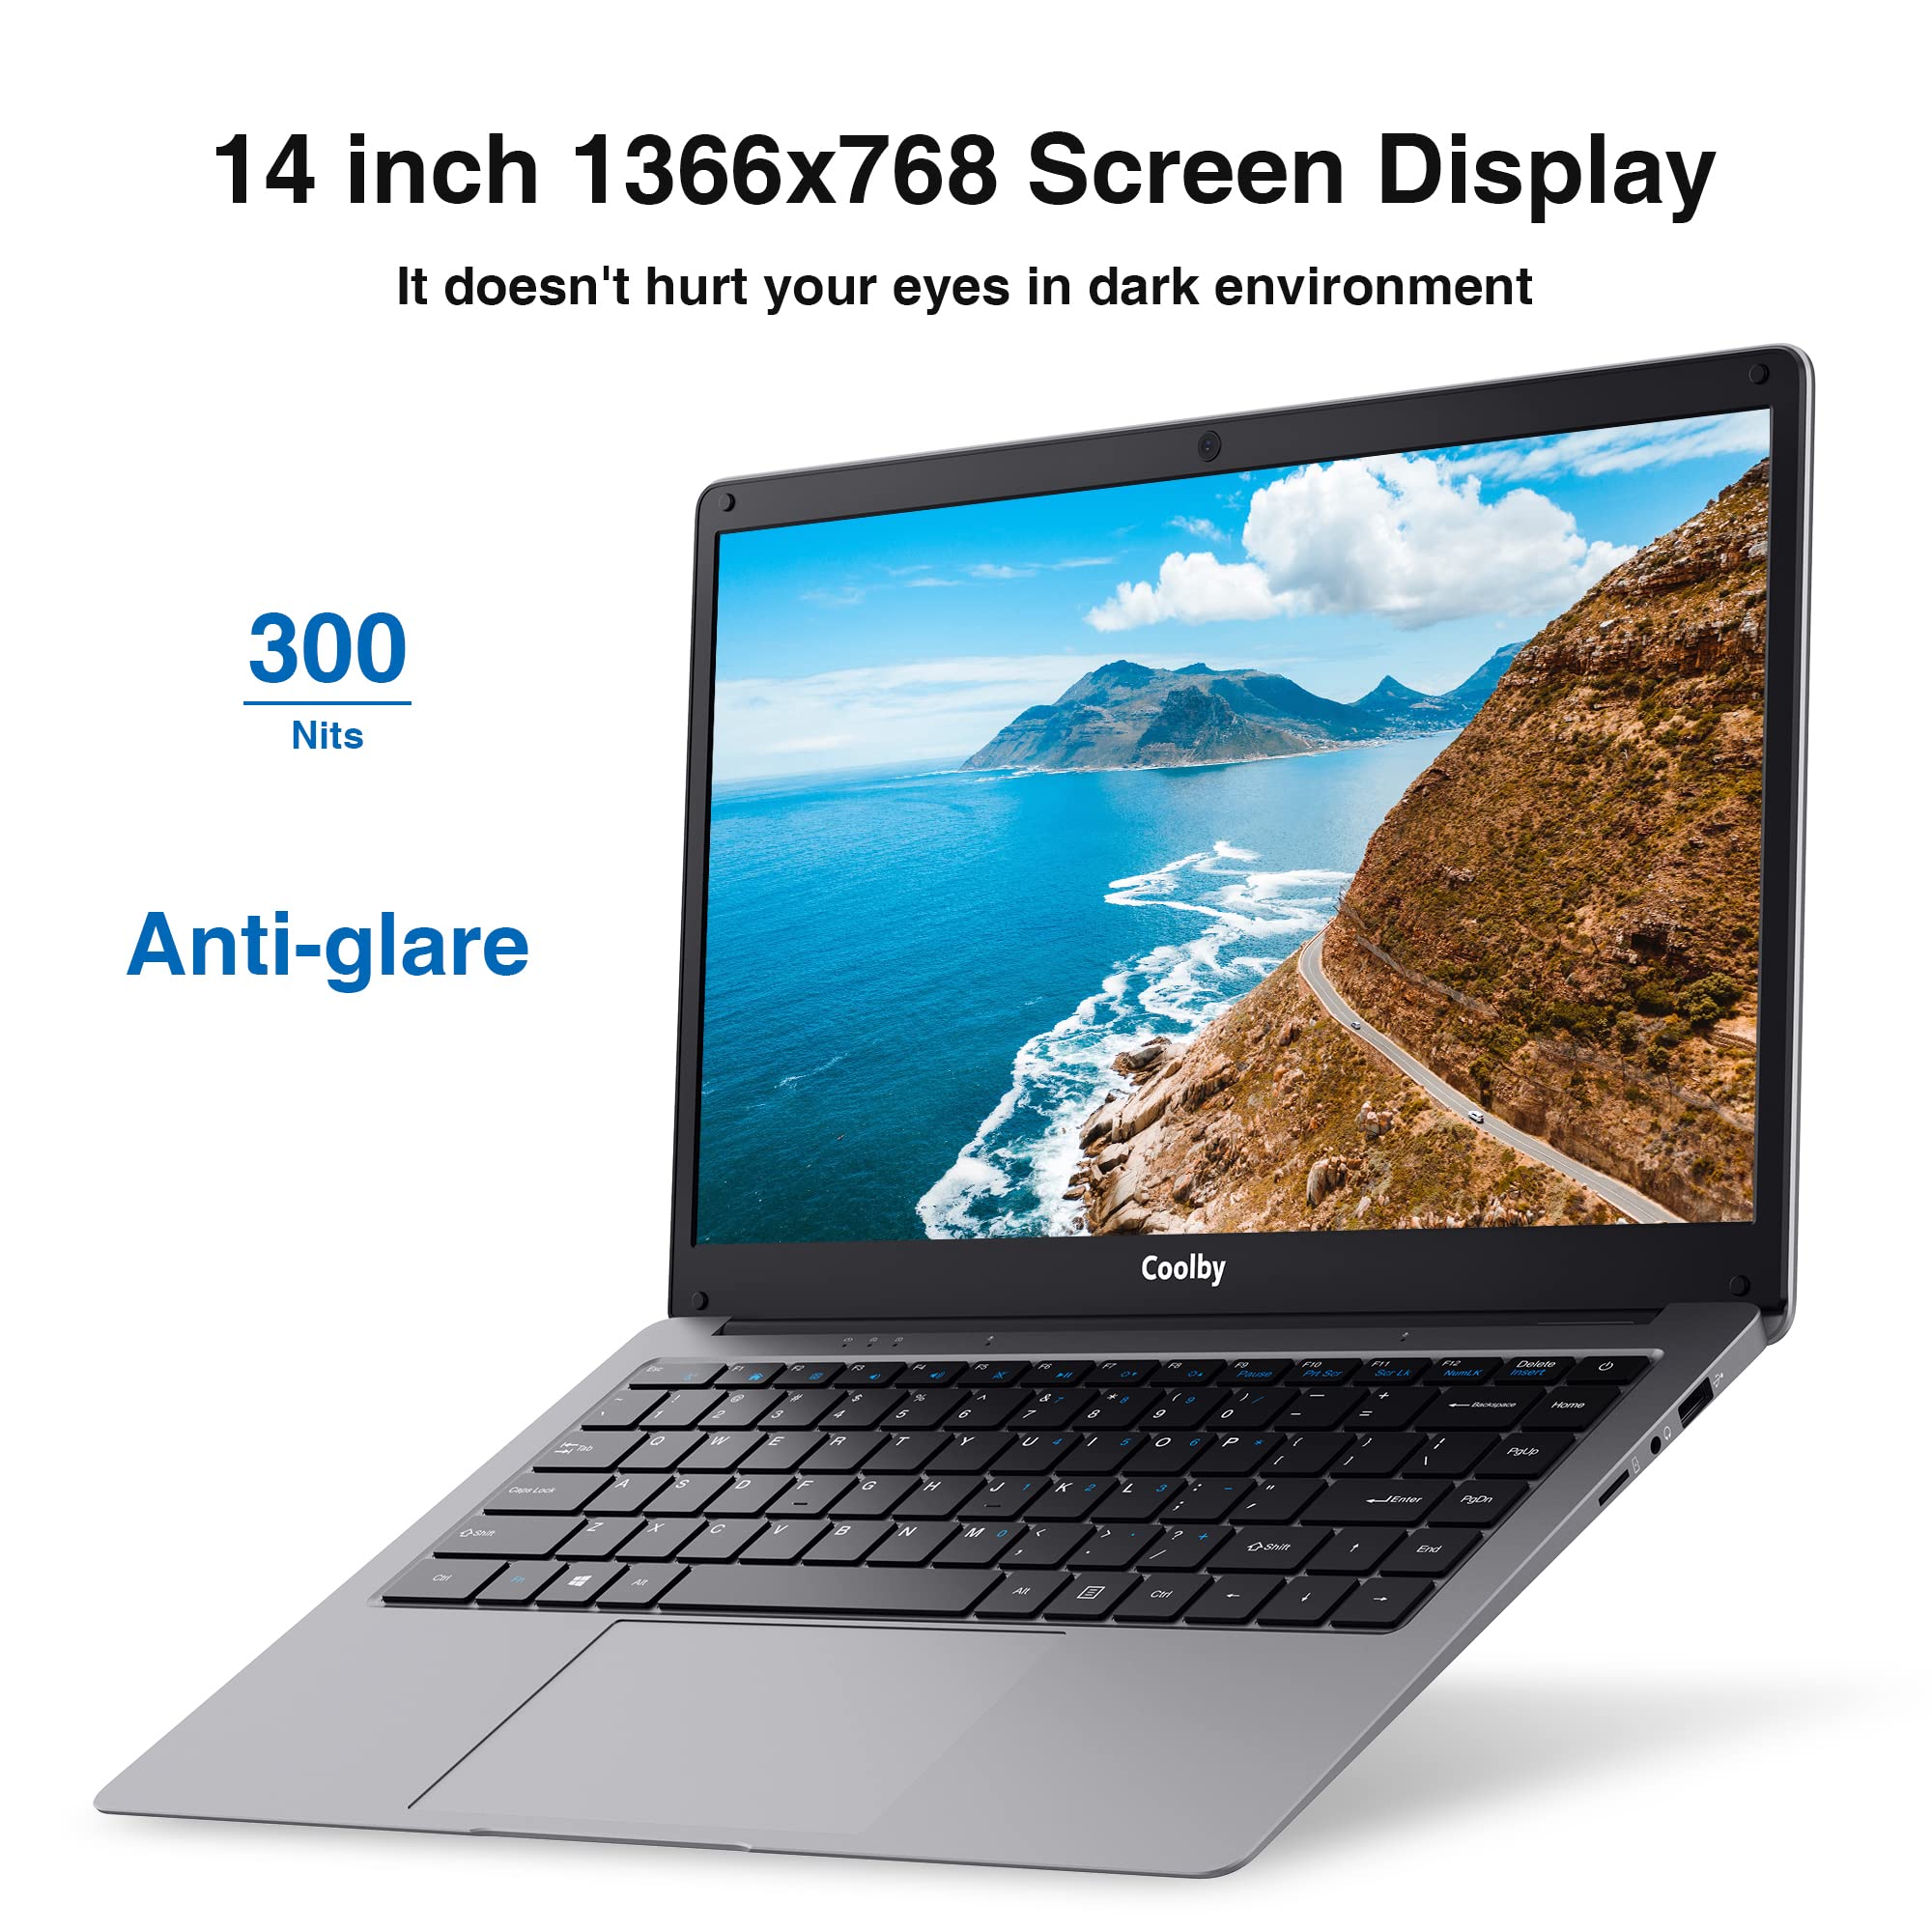 Coolby 2023 Windows 11 Laptop Computer, 14.1 inch Notebook PC with Intel J4005 Processor, 12GB DDR4 RAM / 256GB SSD, HD Display, WiFi, BT, Long -Lasting Battery for School, Business